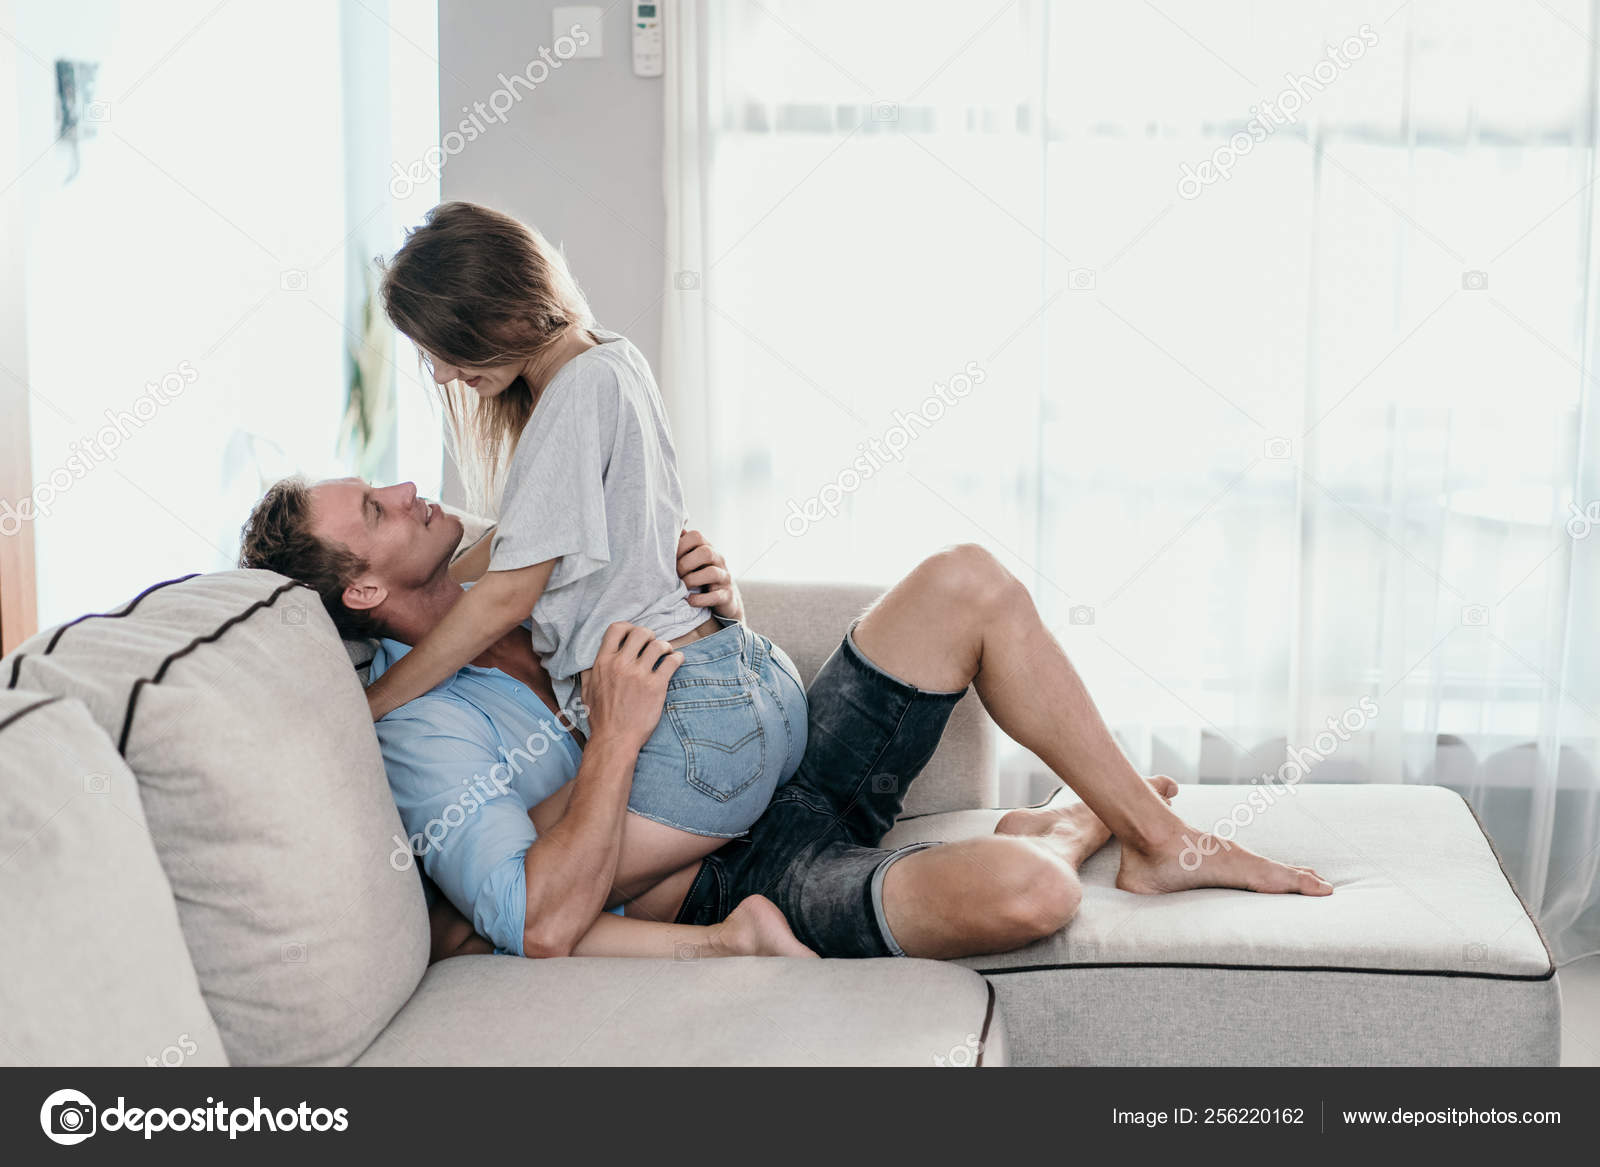 Download - Couple romantic in love. woman sitting on mans lap and hold hand...